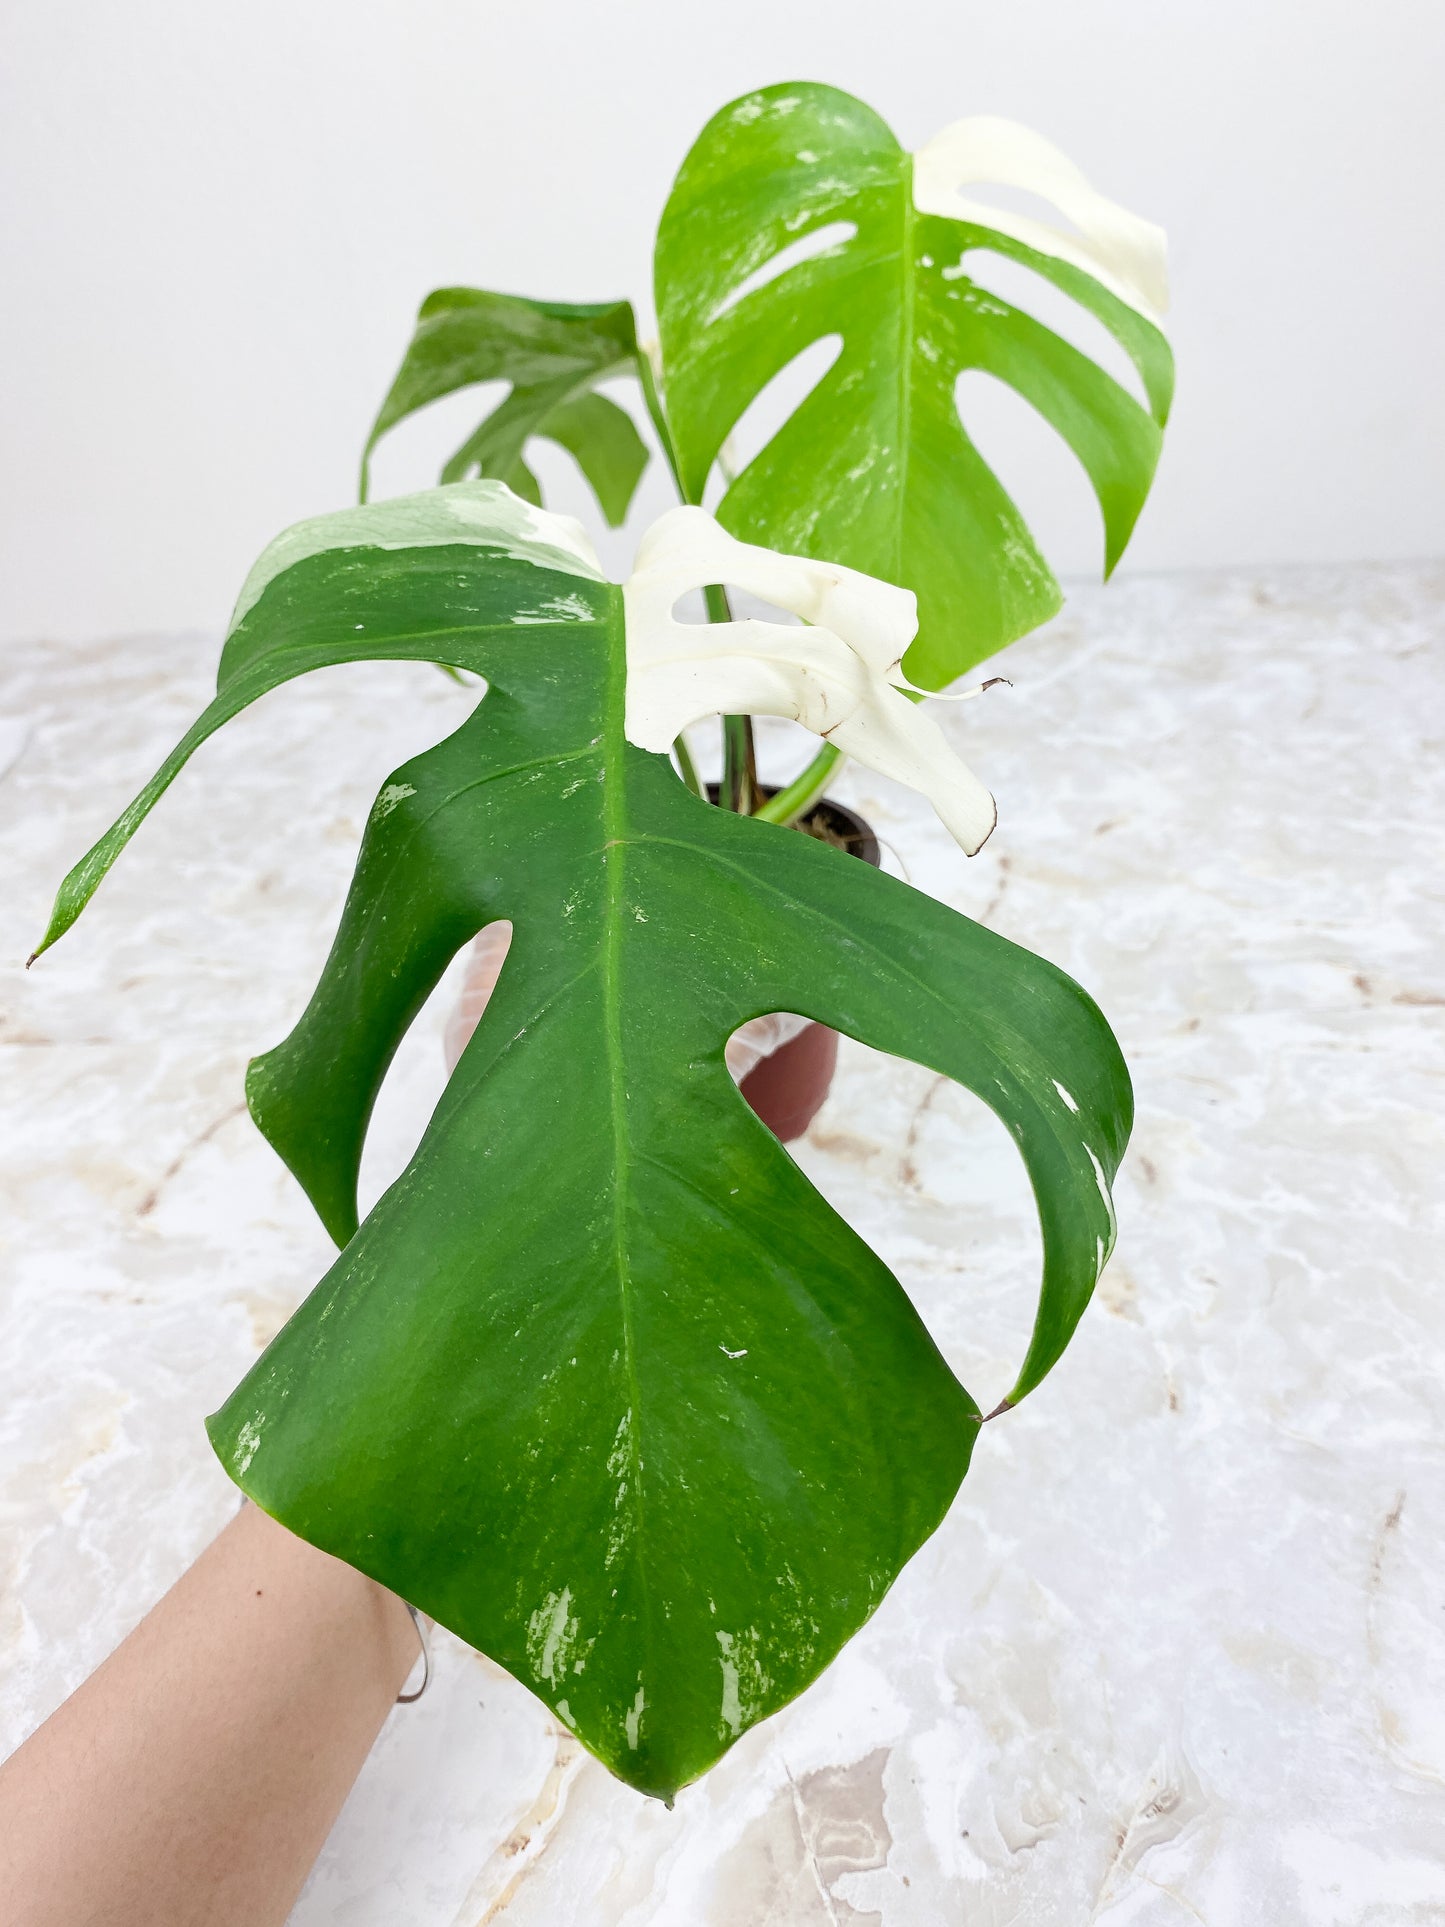 Monstera Borsigiana 3 leaves Rooted Highly Variegated